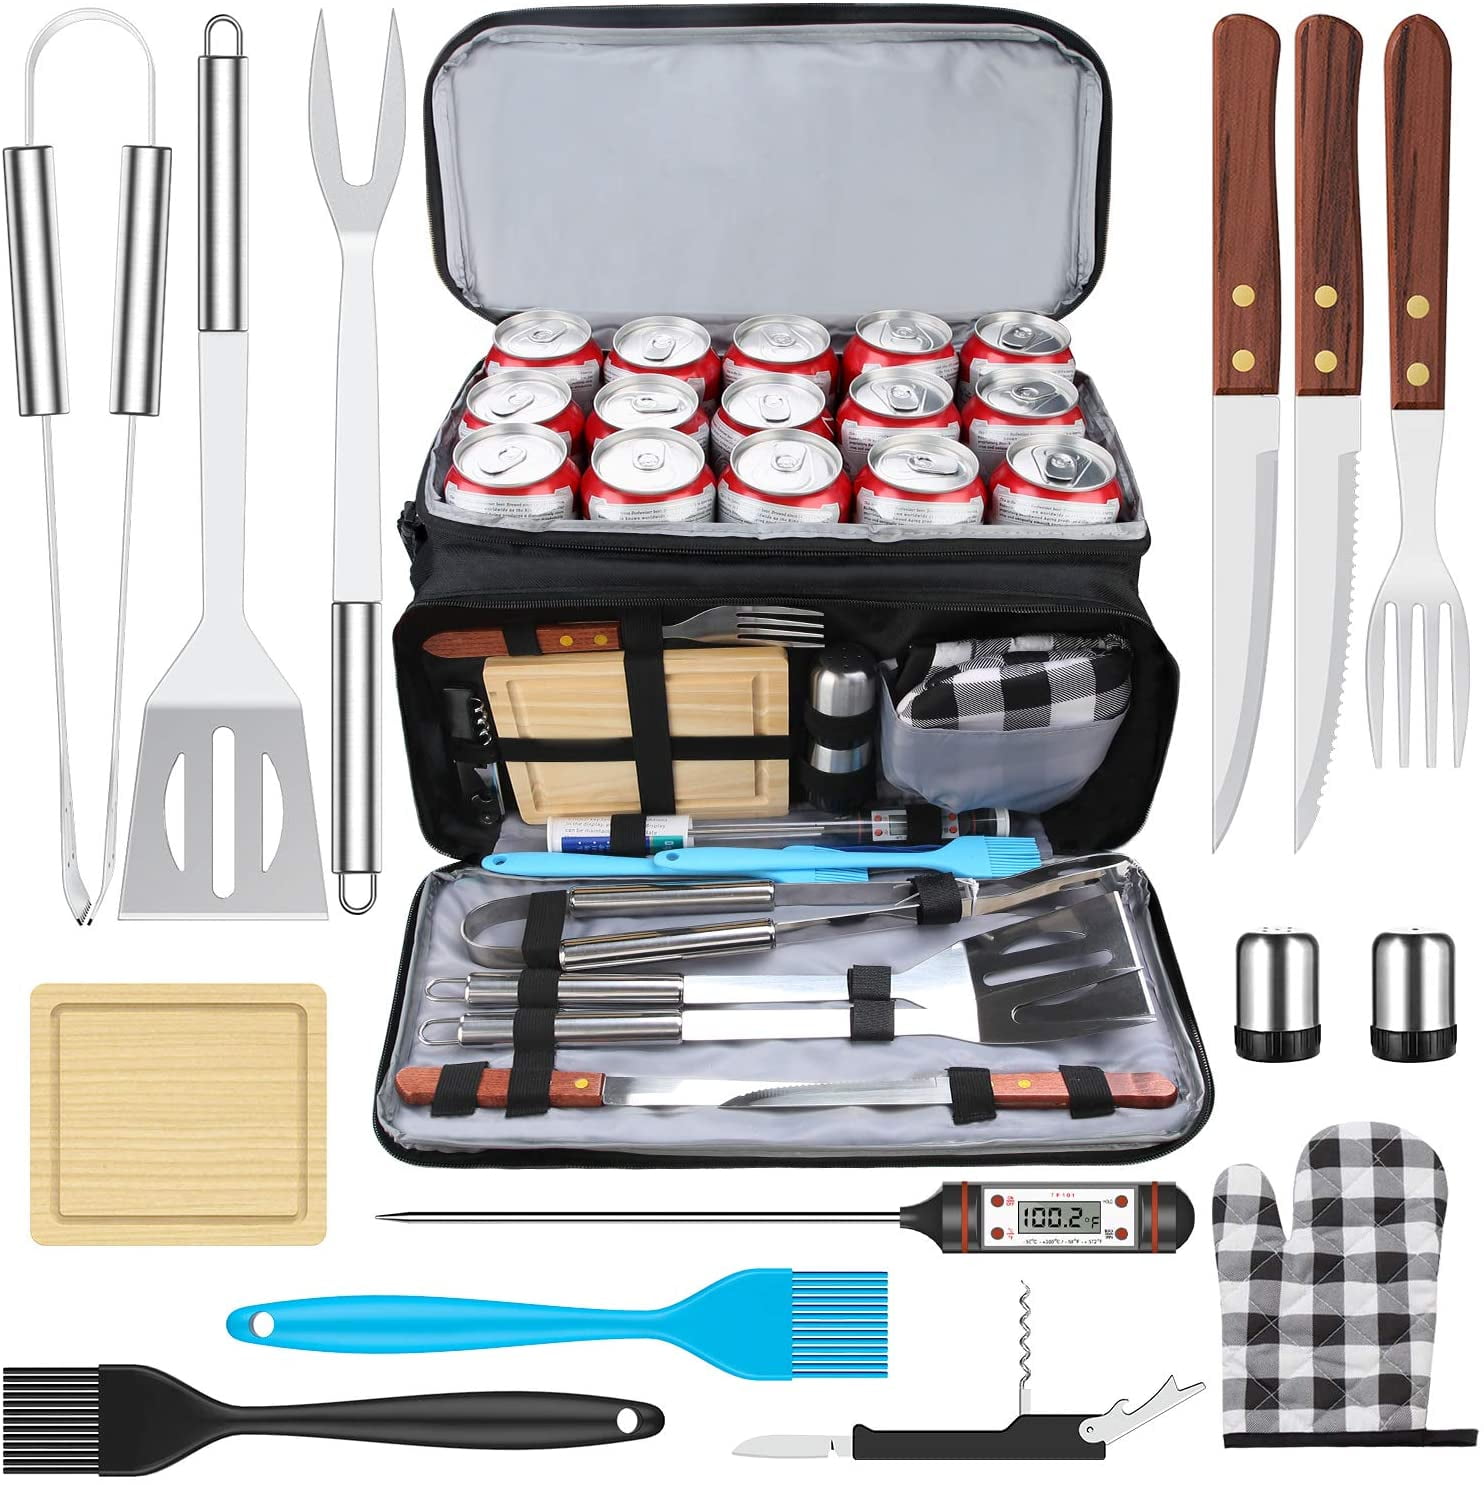 Cifaisi BBQ Grill Utensils Set for Camping/Backyard, 38Pcs Stainless Steel  Grill Tools Grilling Accessories with Barbecue Mats, Aluminum Case